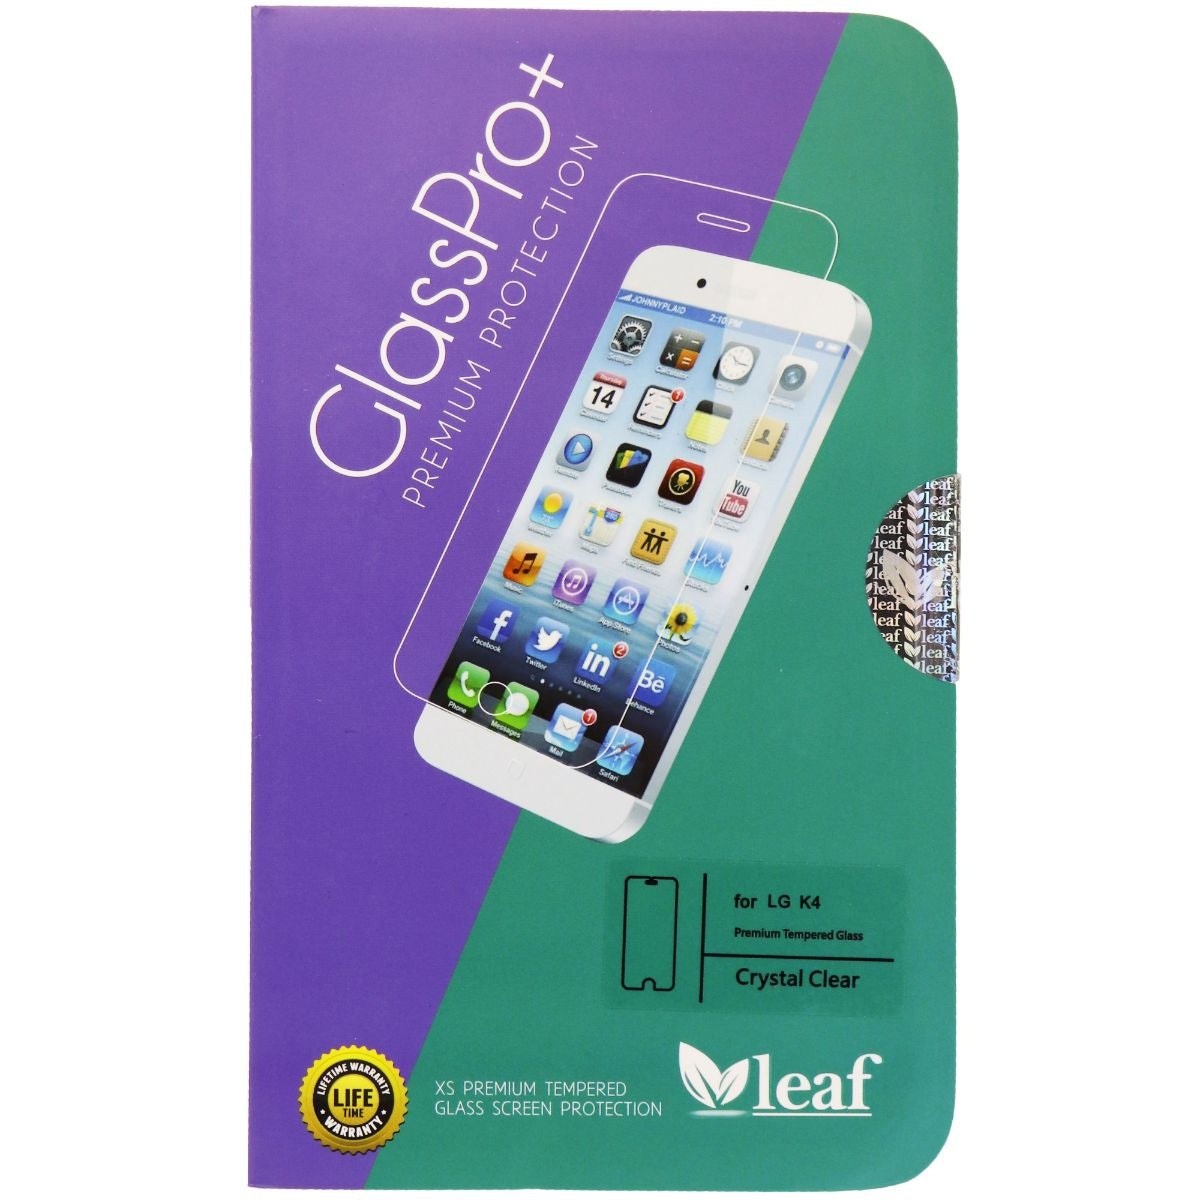 Leaf GlassPro+ Series Glass Screen Protector for LG K4 Smartphone Cell Phone - Screen Protectors Leaf    - Simple Cell Bulk Wholesale Pricing - USA Seller